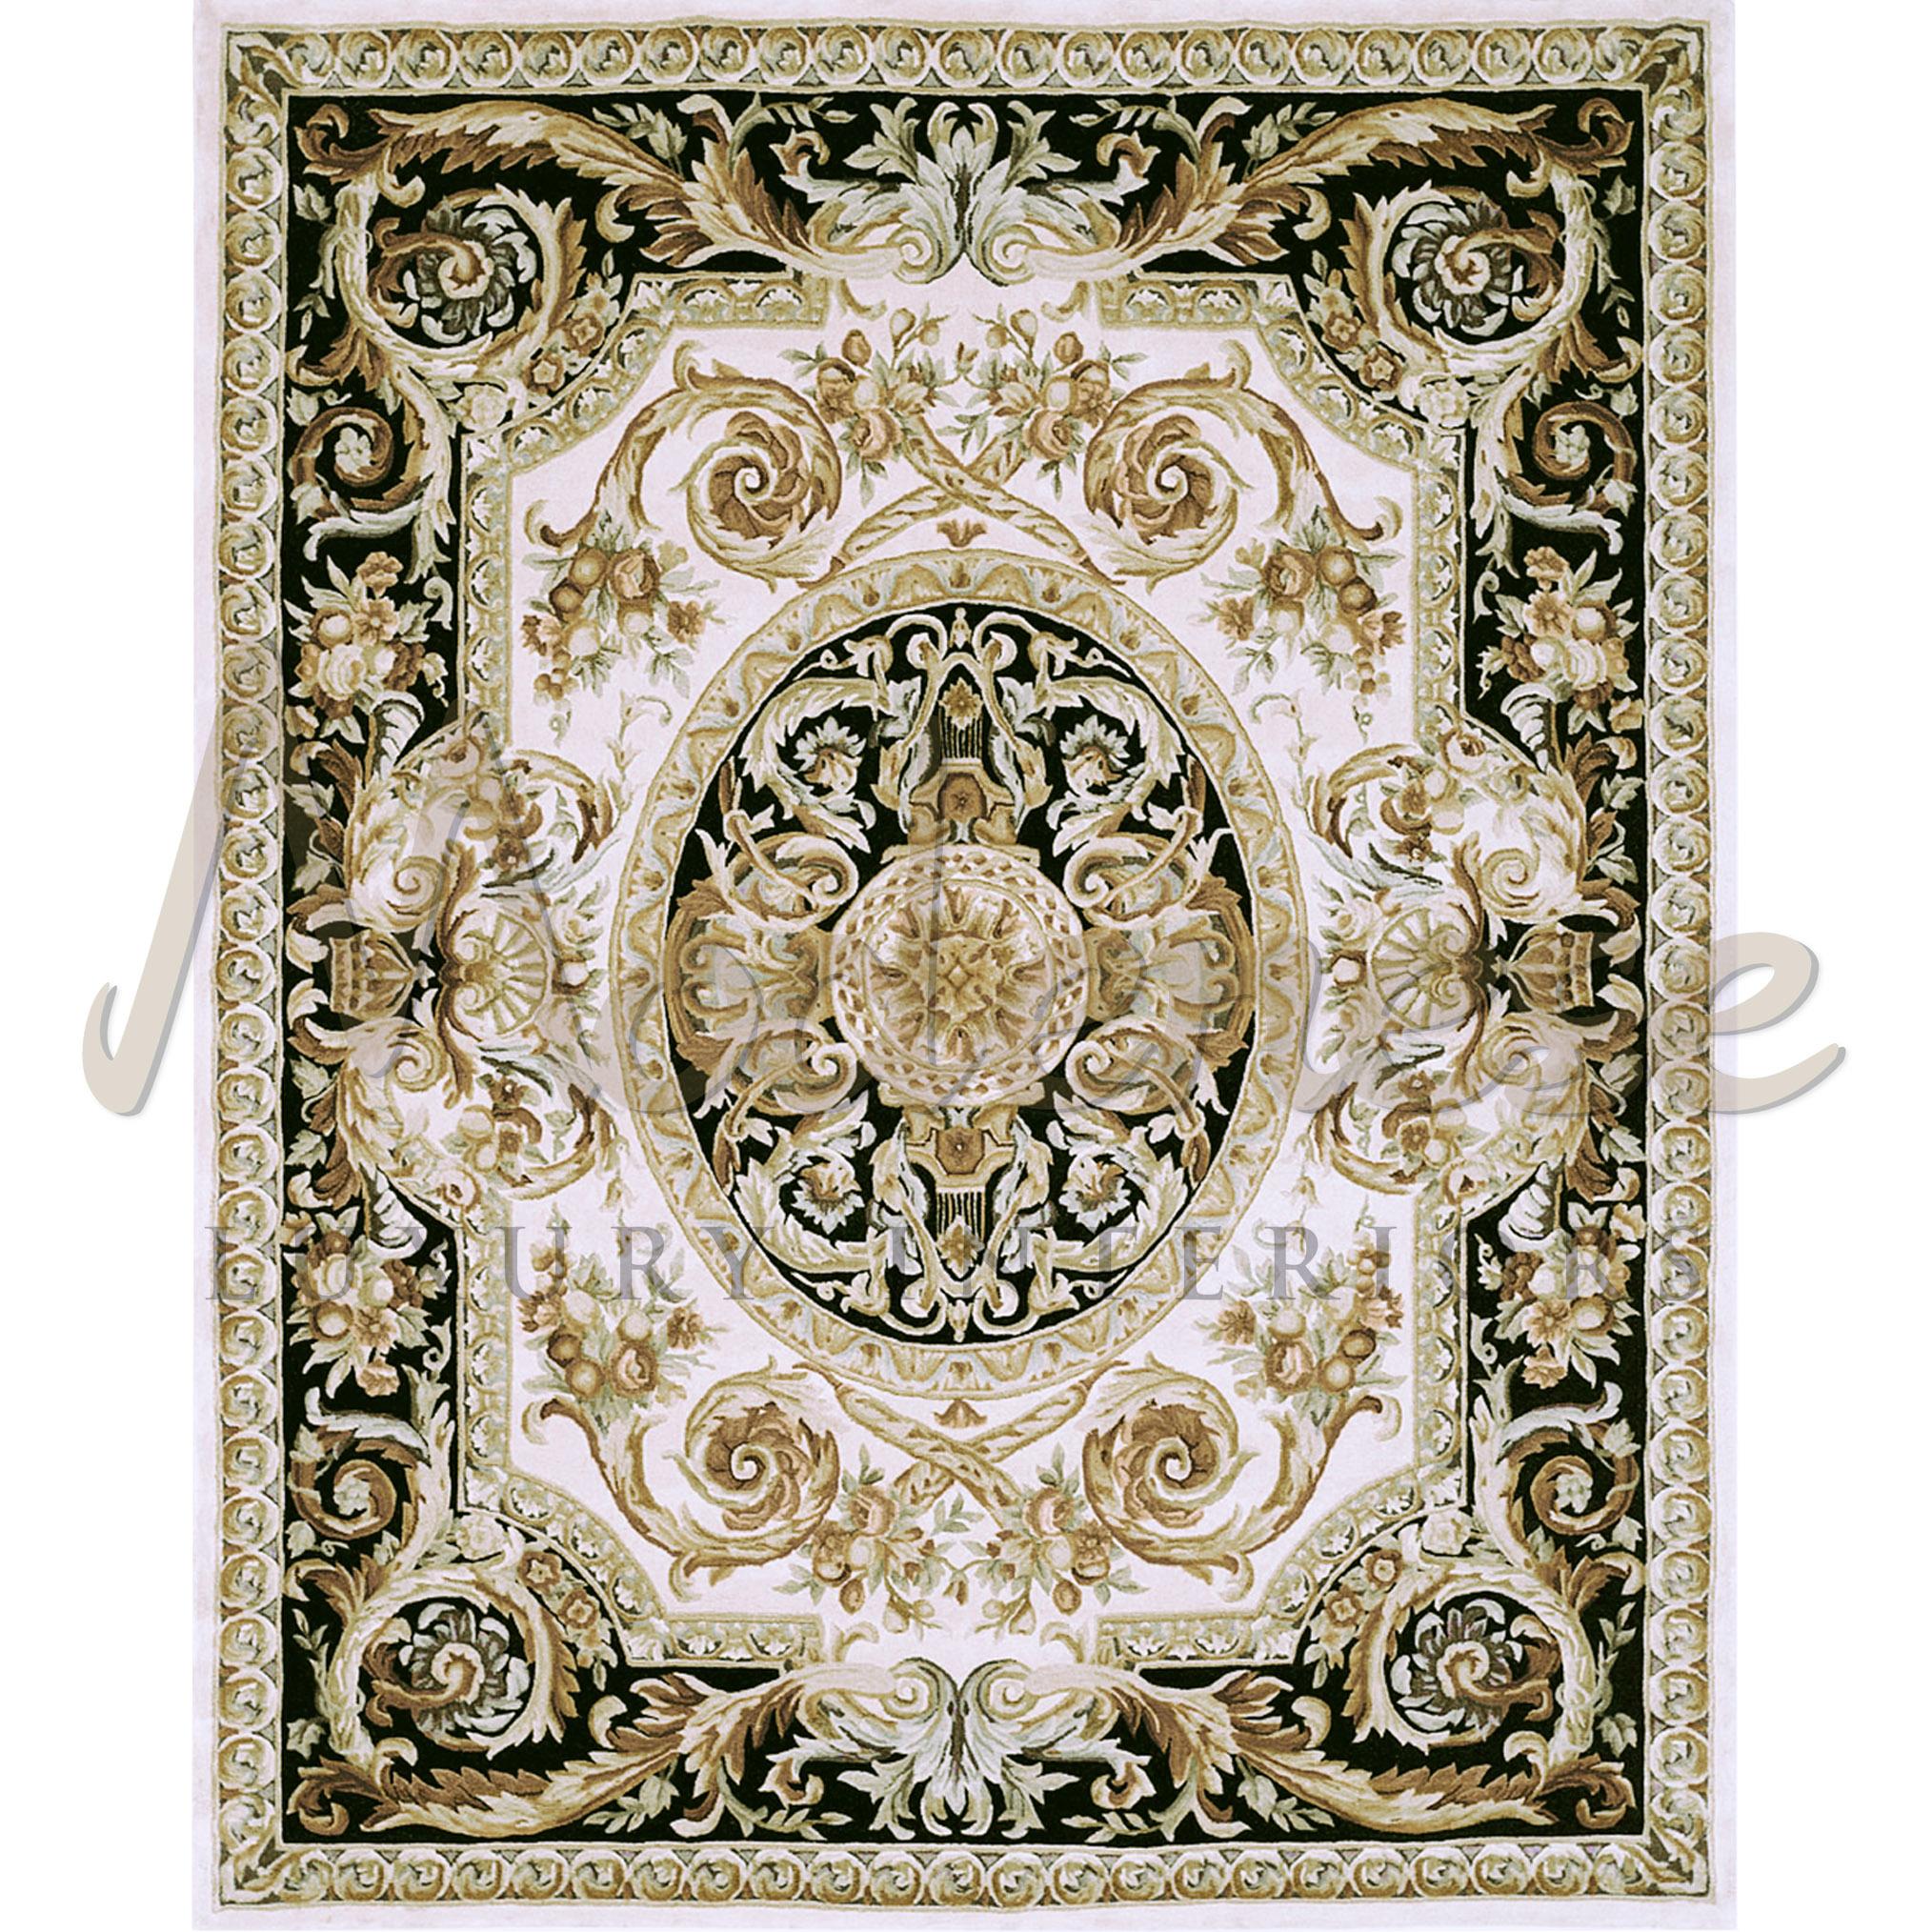 Shiny 100% bamboo silk oriental rug handbraided by skilled Italian artisans for the design brand Modenese Luxury Interiors. This item goes best with neoclassical furnishings in private living room. Intricate pattern of baroque squiggles displaying